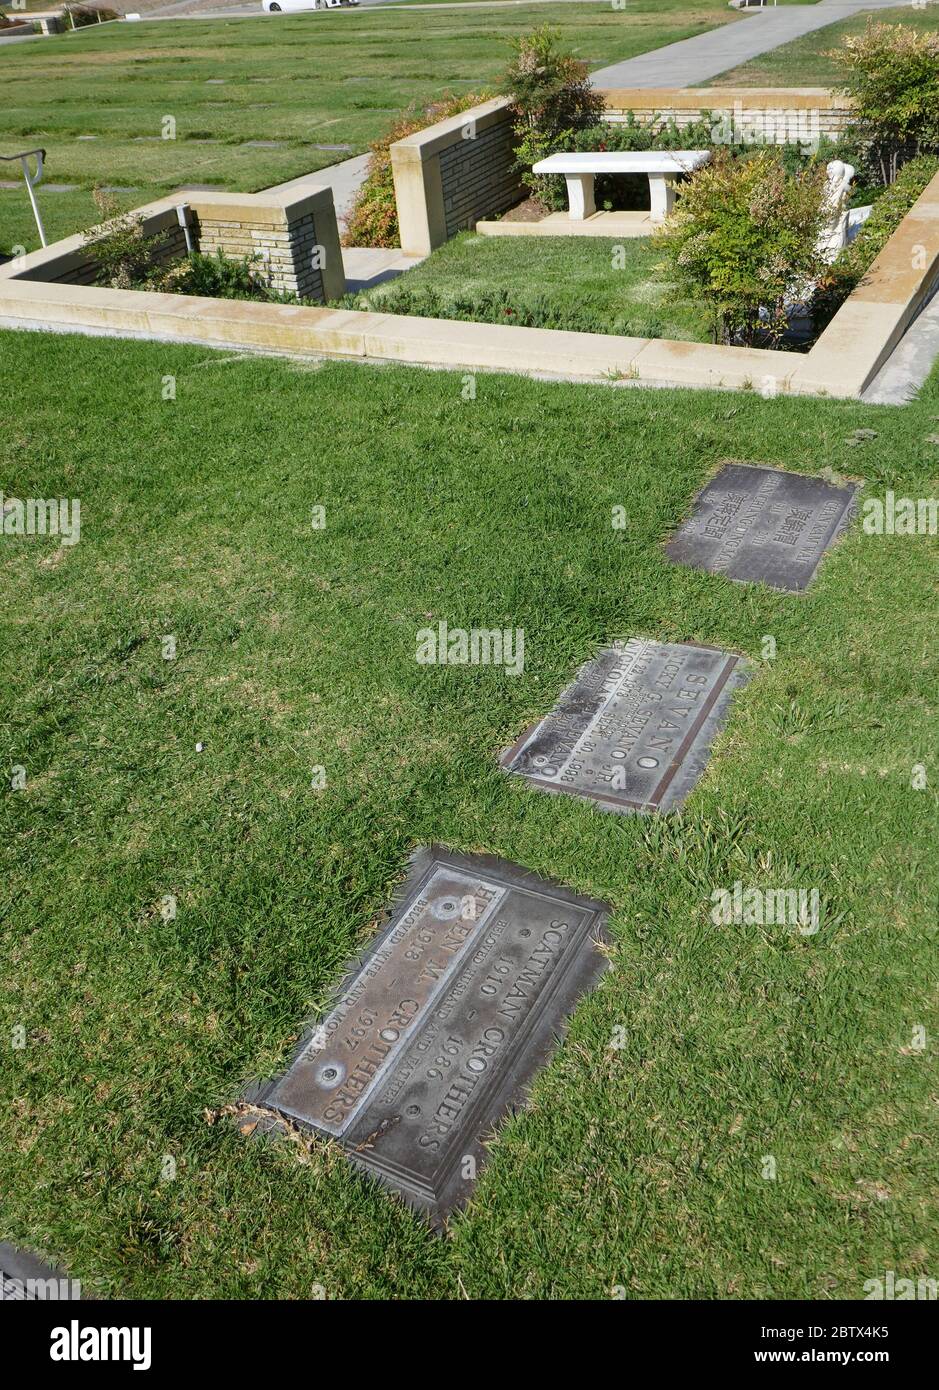 Los Angeles, California, USA 27th May 2020 A general view of atmosphere of Scatman Crother's Grave at Forest Lawn Memorial Park on May 27, 2020 in Los Angeles, California, USA. Photo by Barry King/Alamy Stock Photo Stock Photo